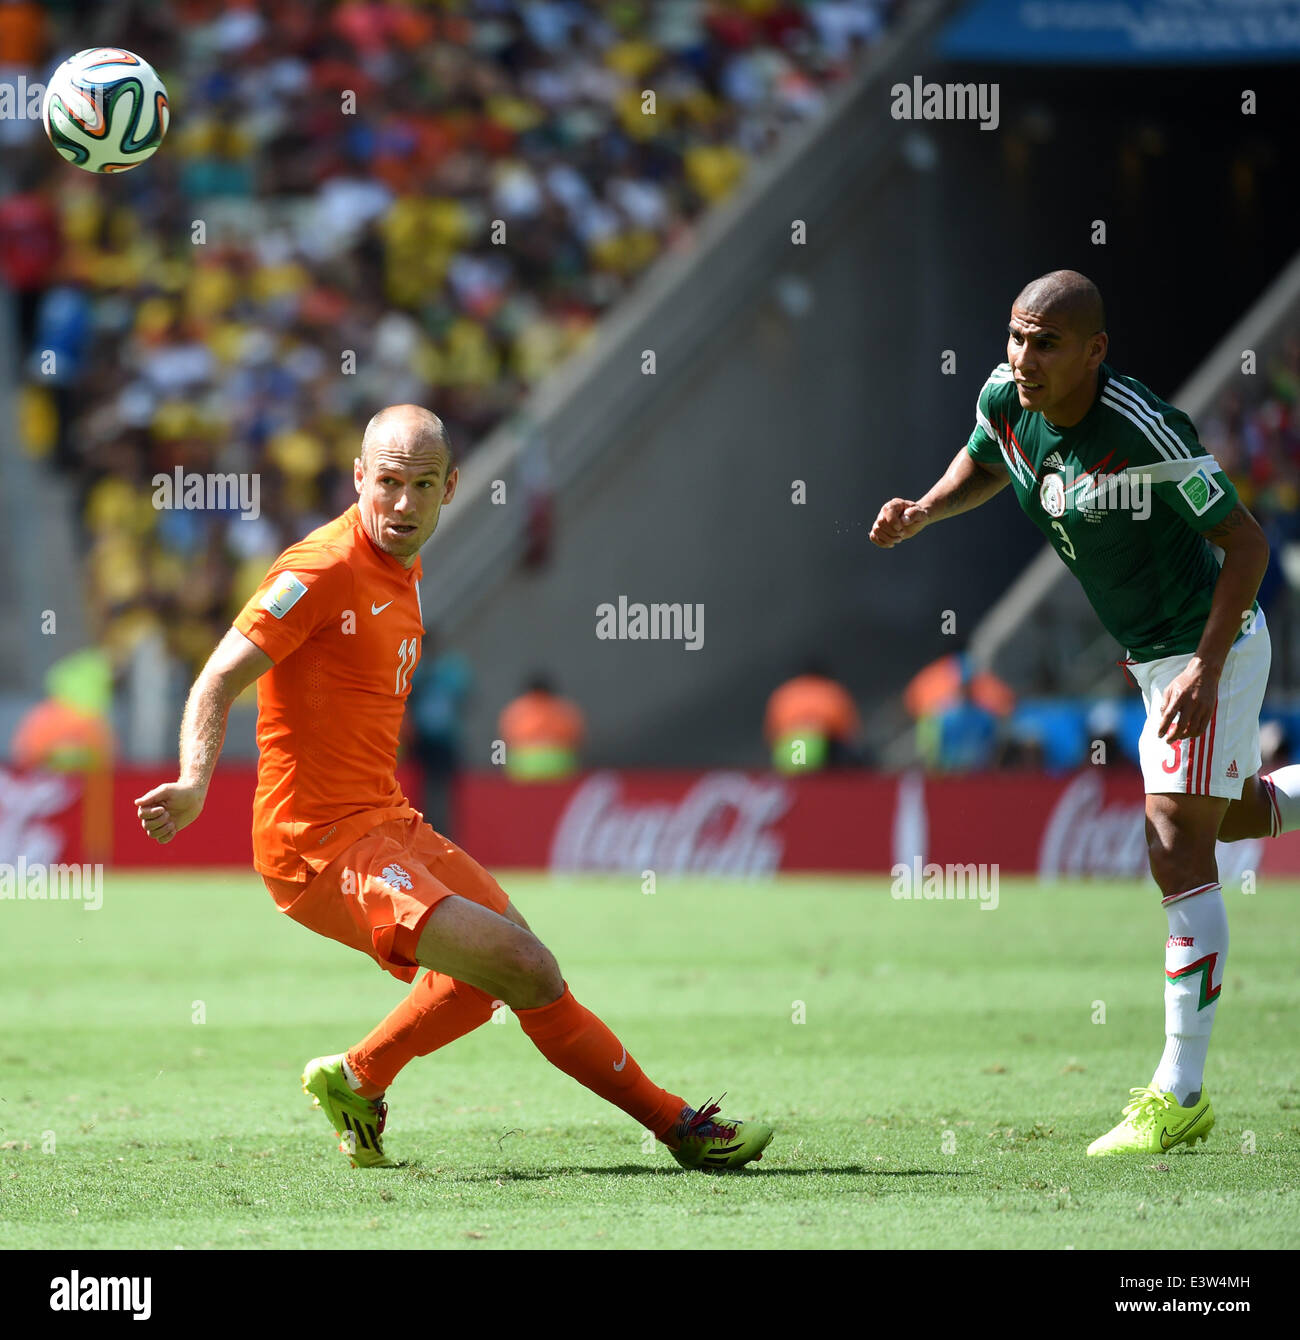 Fortaleza, Brazil. 29th June, 2014. Netherlands's Arjen Robben (L) vies with Mexico's Carlos Salcido during a Round of 16 match between Netherlands and Mexico of 2014 FIFA World Cup at the Estadio Castelao Stadium in Fortaleza, Brazil, on June 29, 2014. Netherlands won 2-1 over Mexico and qualified for Quarter-finals on Sunday. Credit:  Li Ga/Xinhua/Alamy Live News Stock Photo